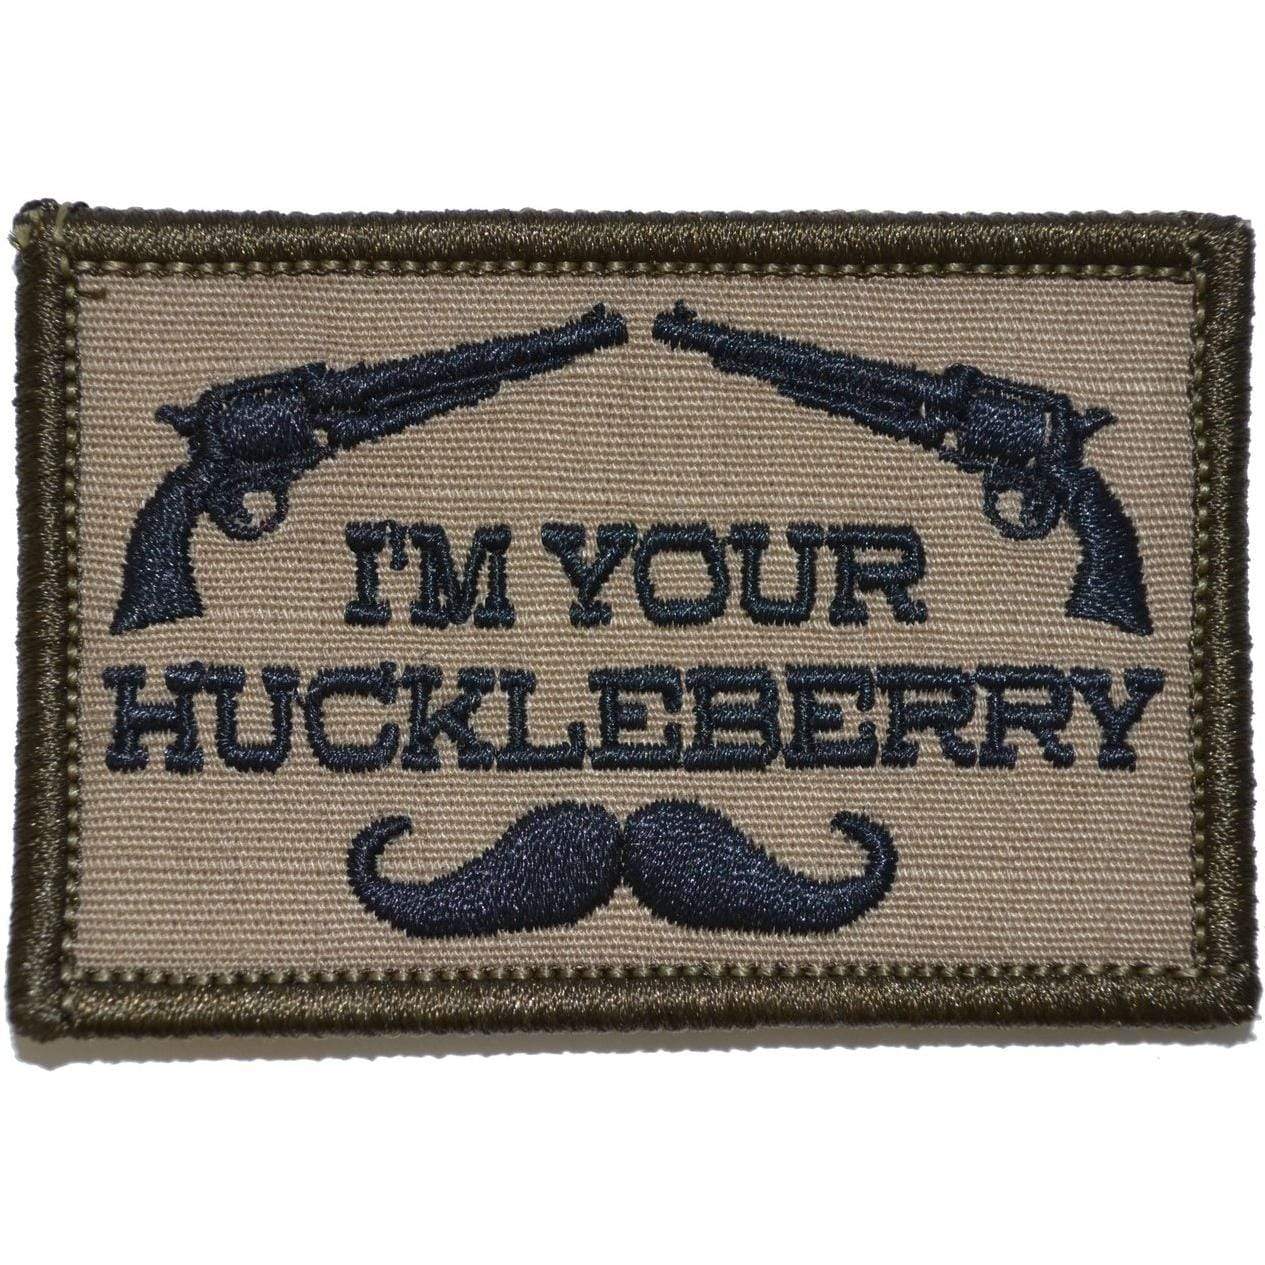 Tactical Gear Junkie Patches Coyote Brown w/ Black I'm Your Huckleberry - 2x3 Hat Patch